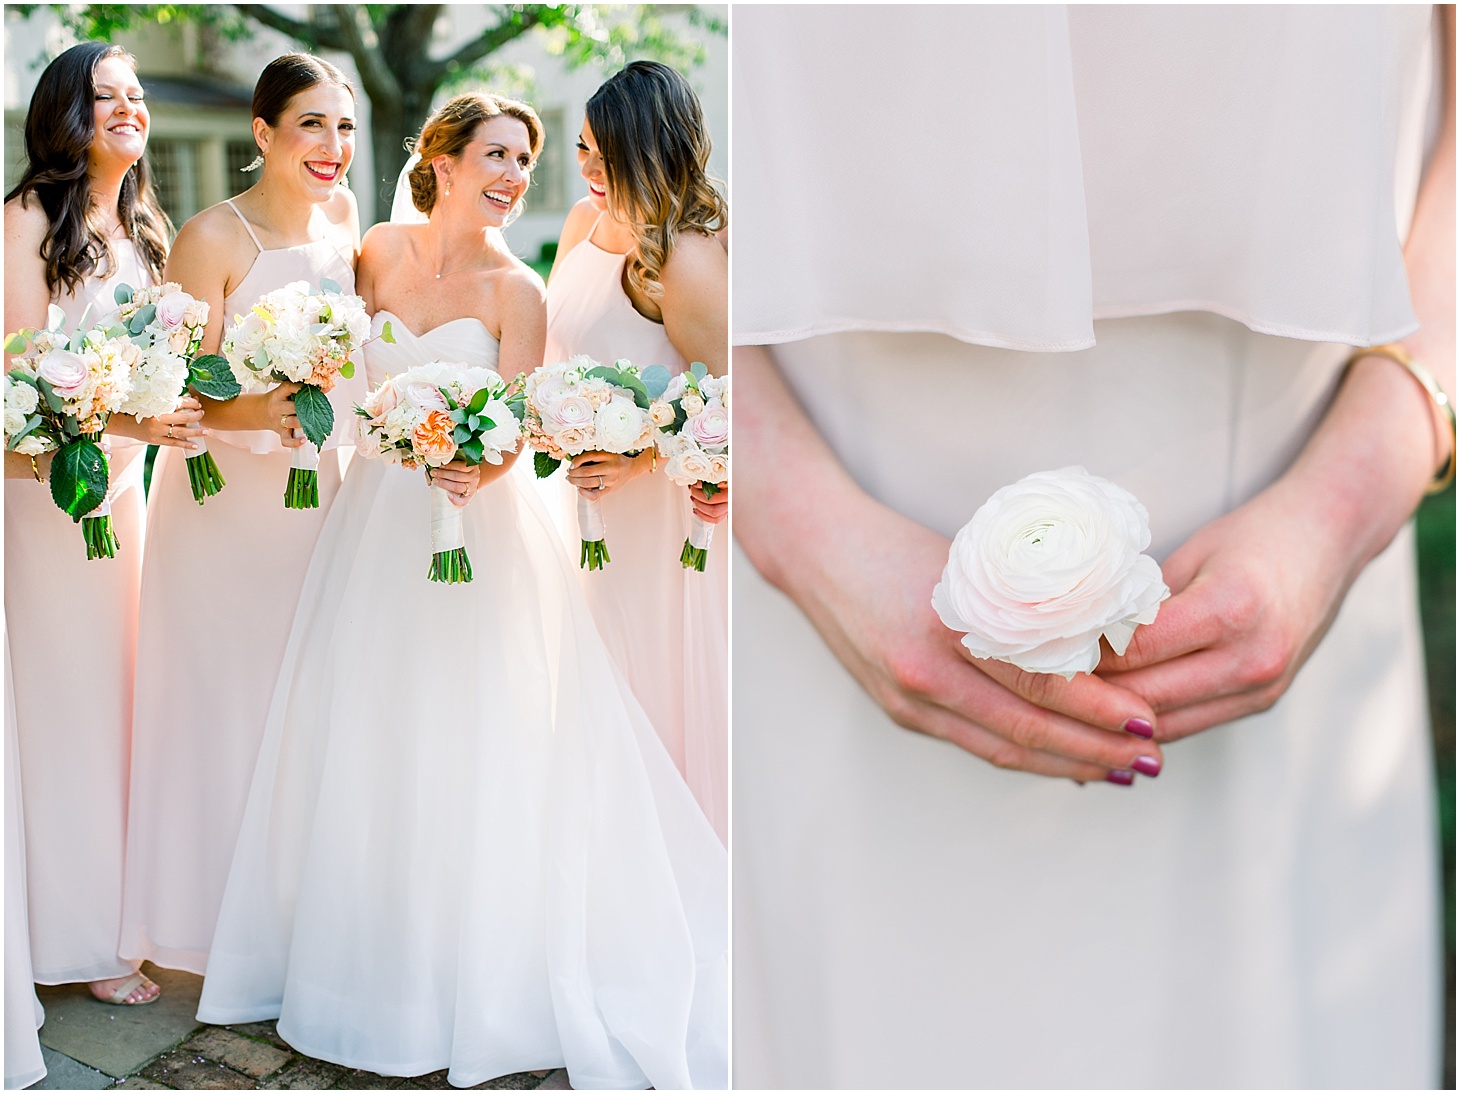 Bride and Bridesmaids at the Williamsburg Inn | Wedding Ceremony at St. Olaf Catholic Church | Blush and Black Tie Wedding in Williamsburg, VA | Sarah Bradshaw Photography